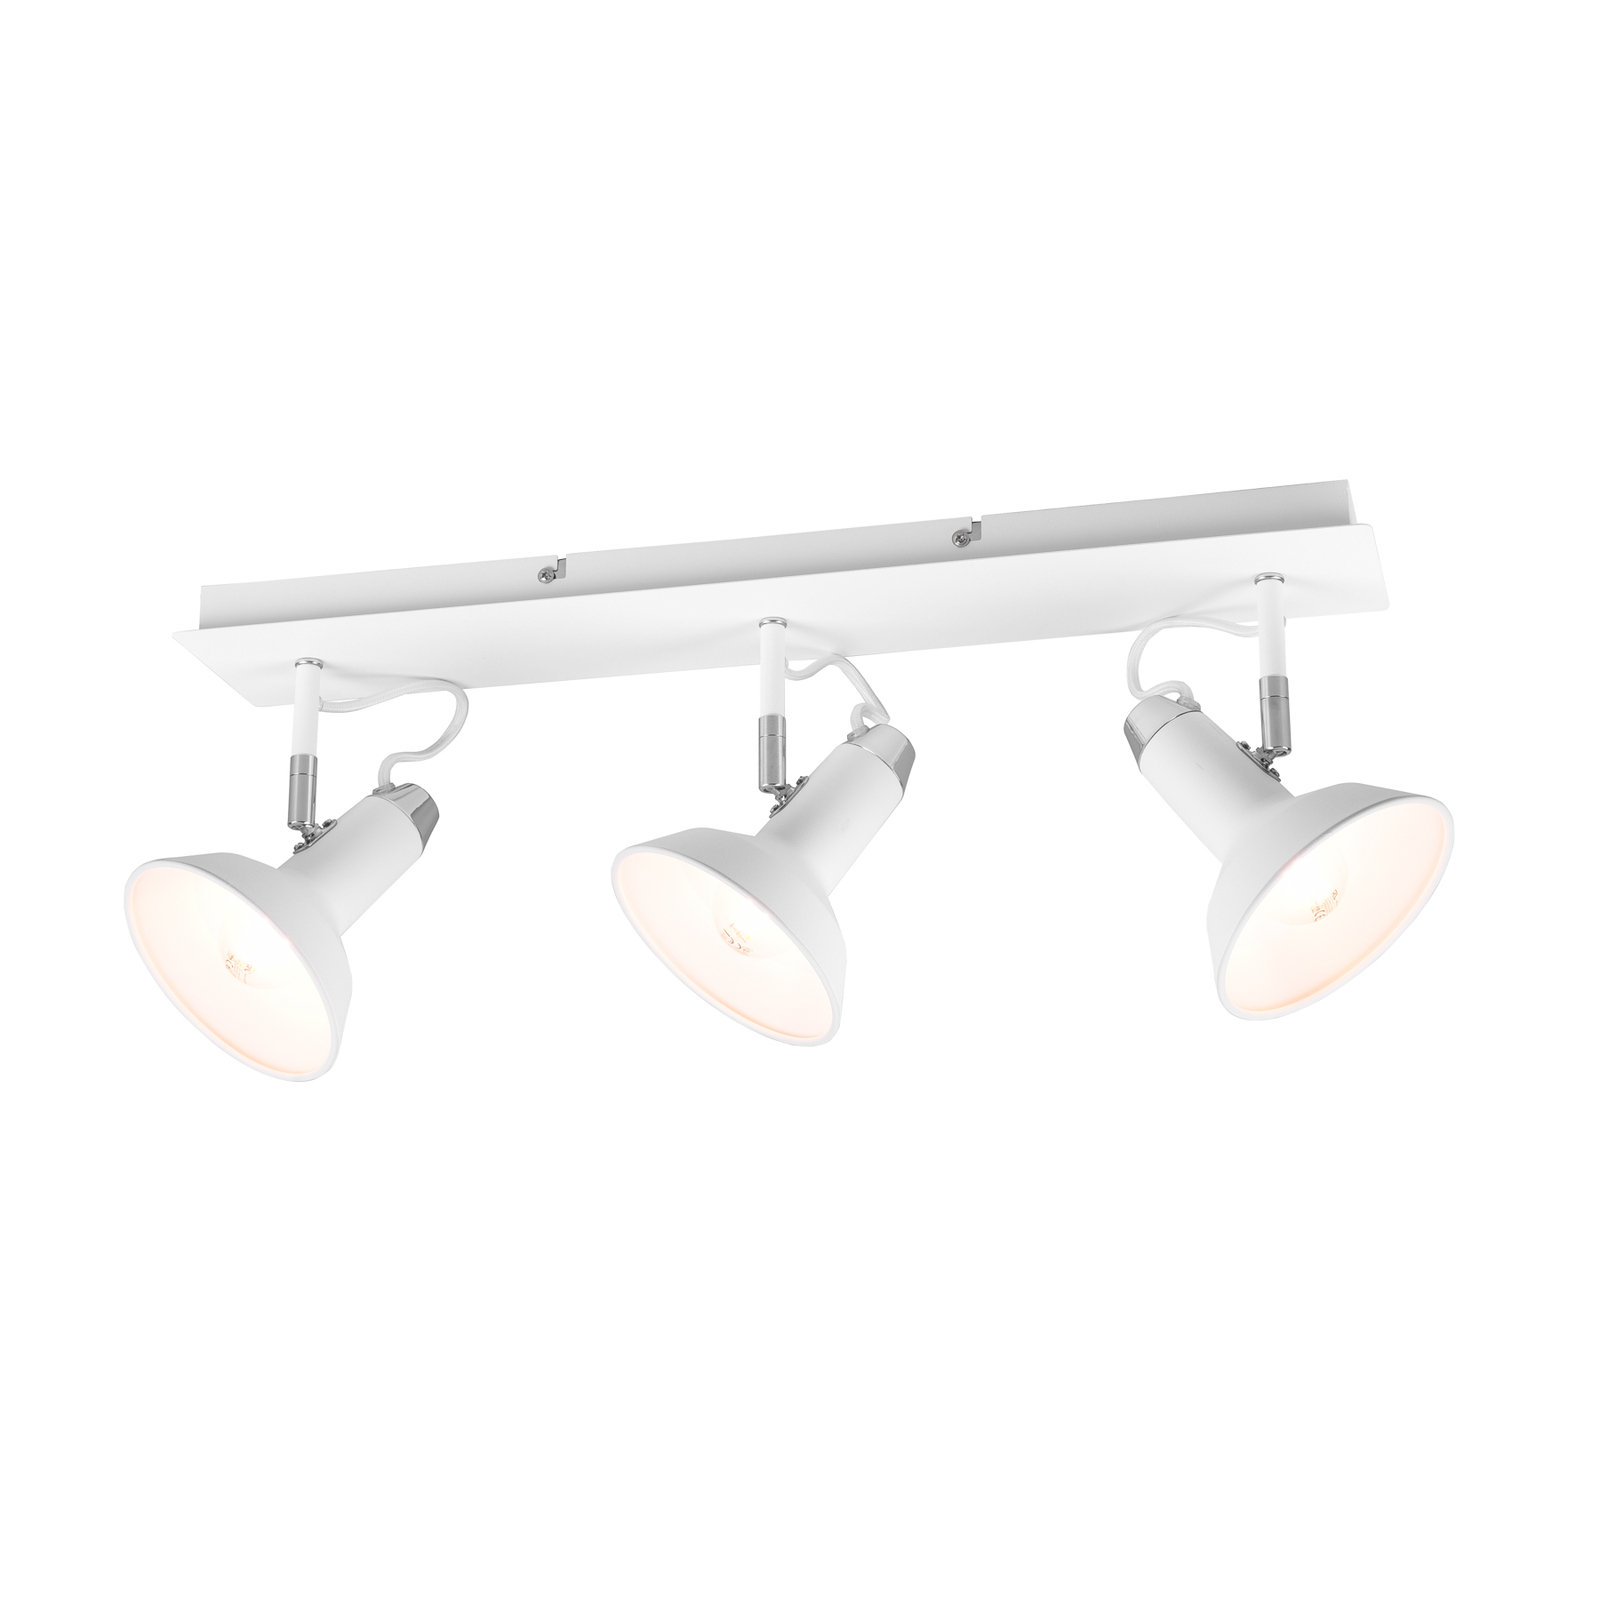 Downlight Roxie orientable 3 luces blanco mate